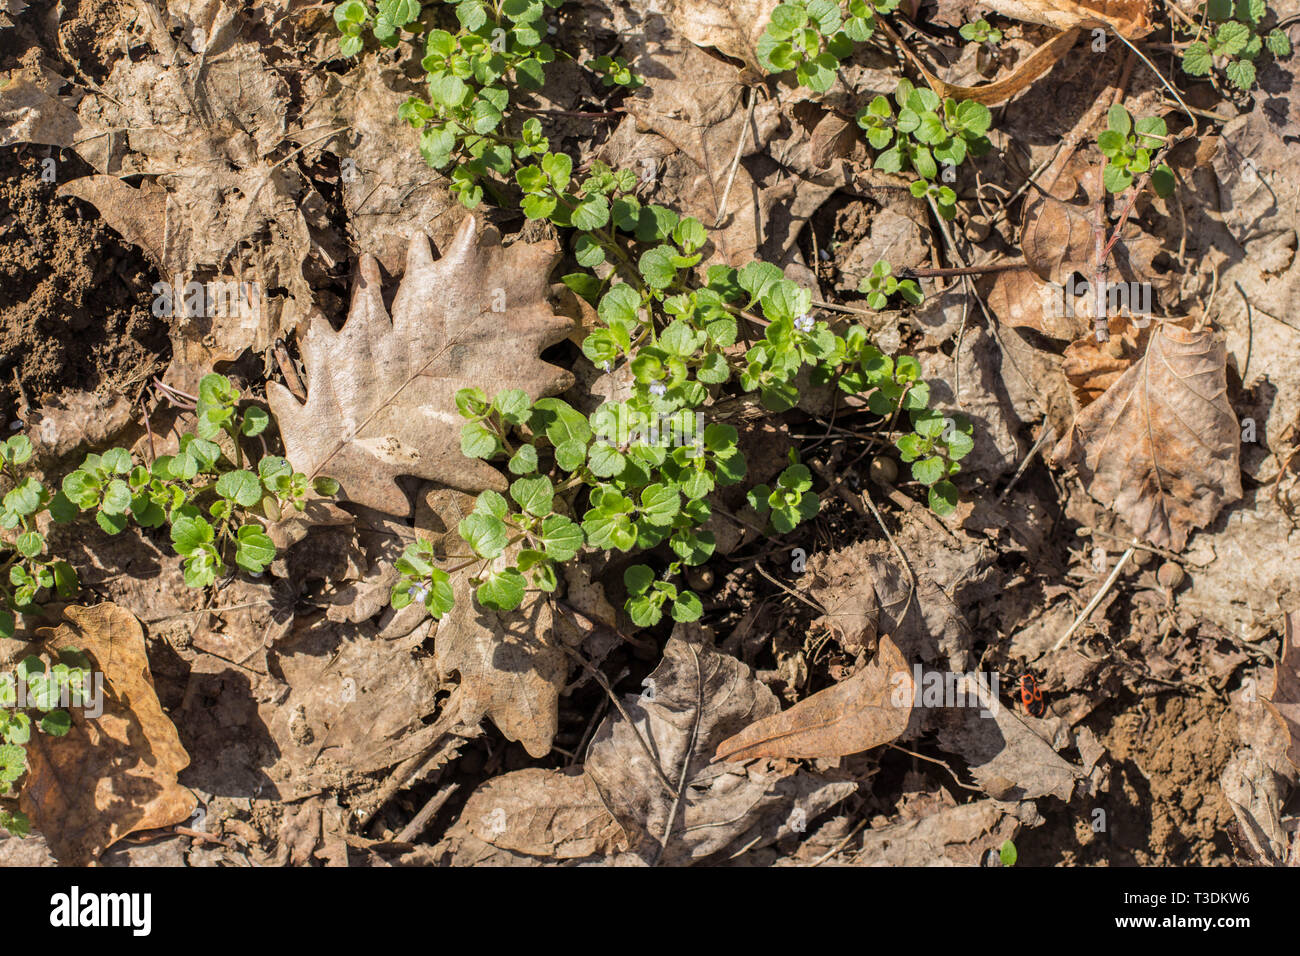 Ivy-leaved speedwell - latin name Veronica hederifolia Stock Photo